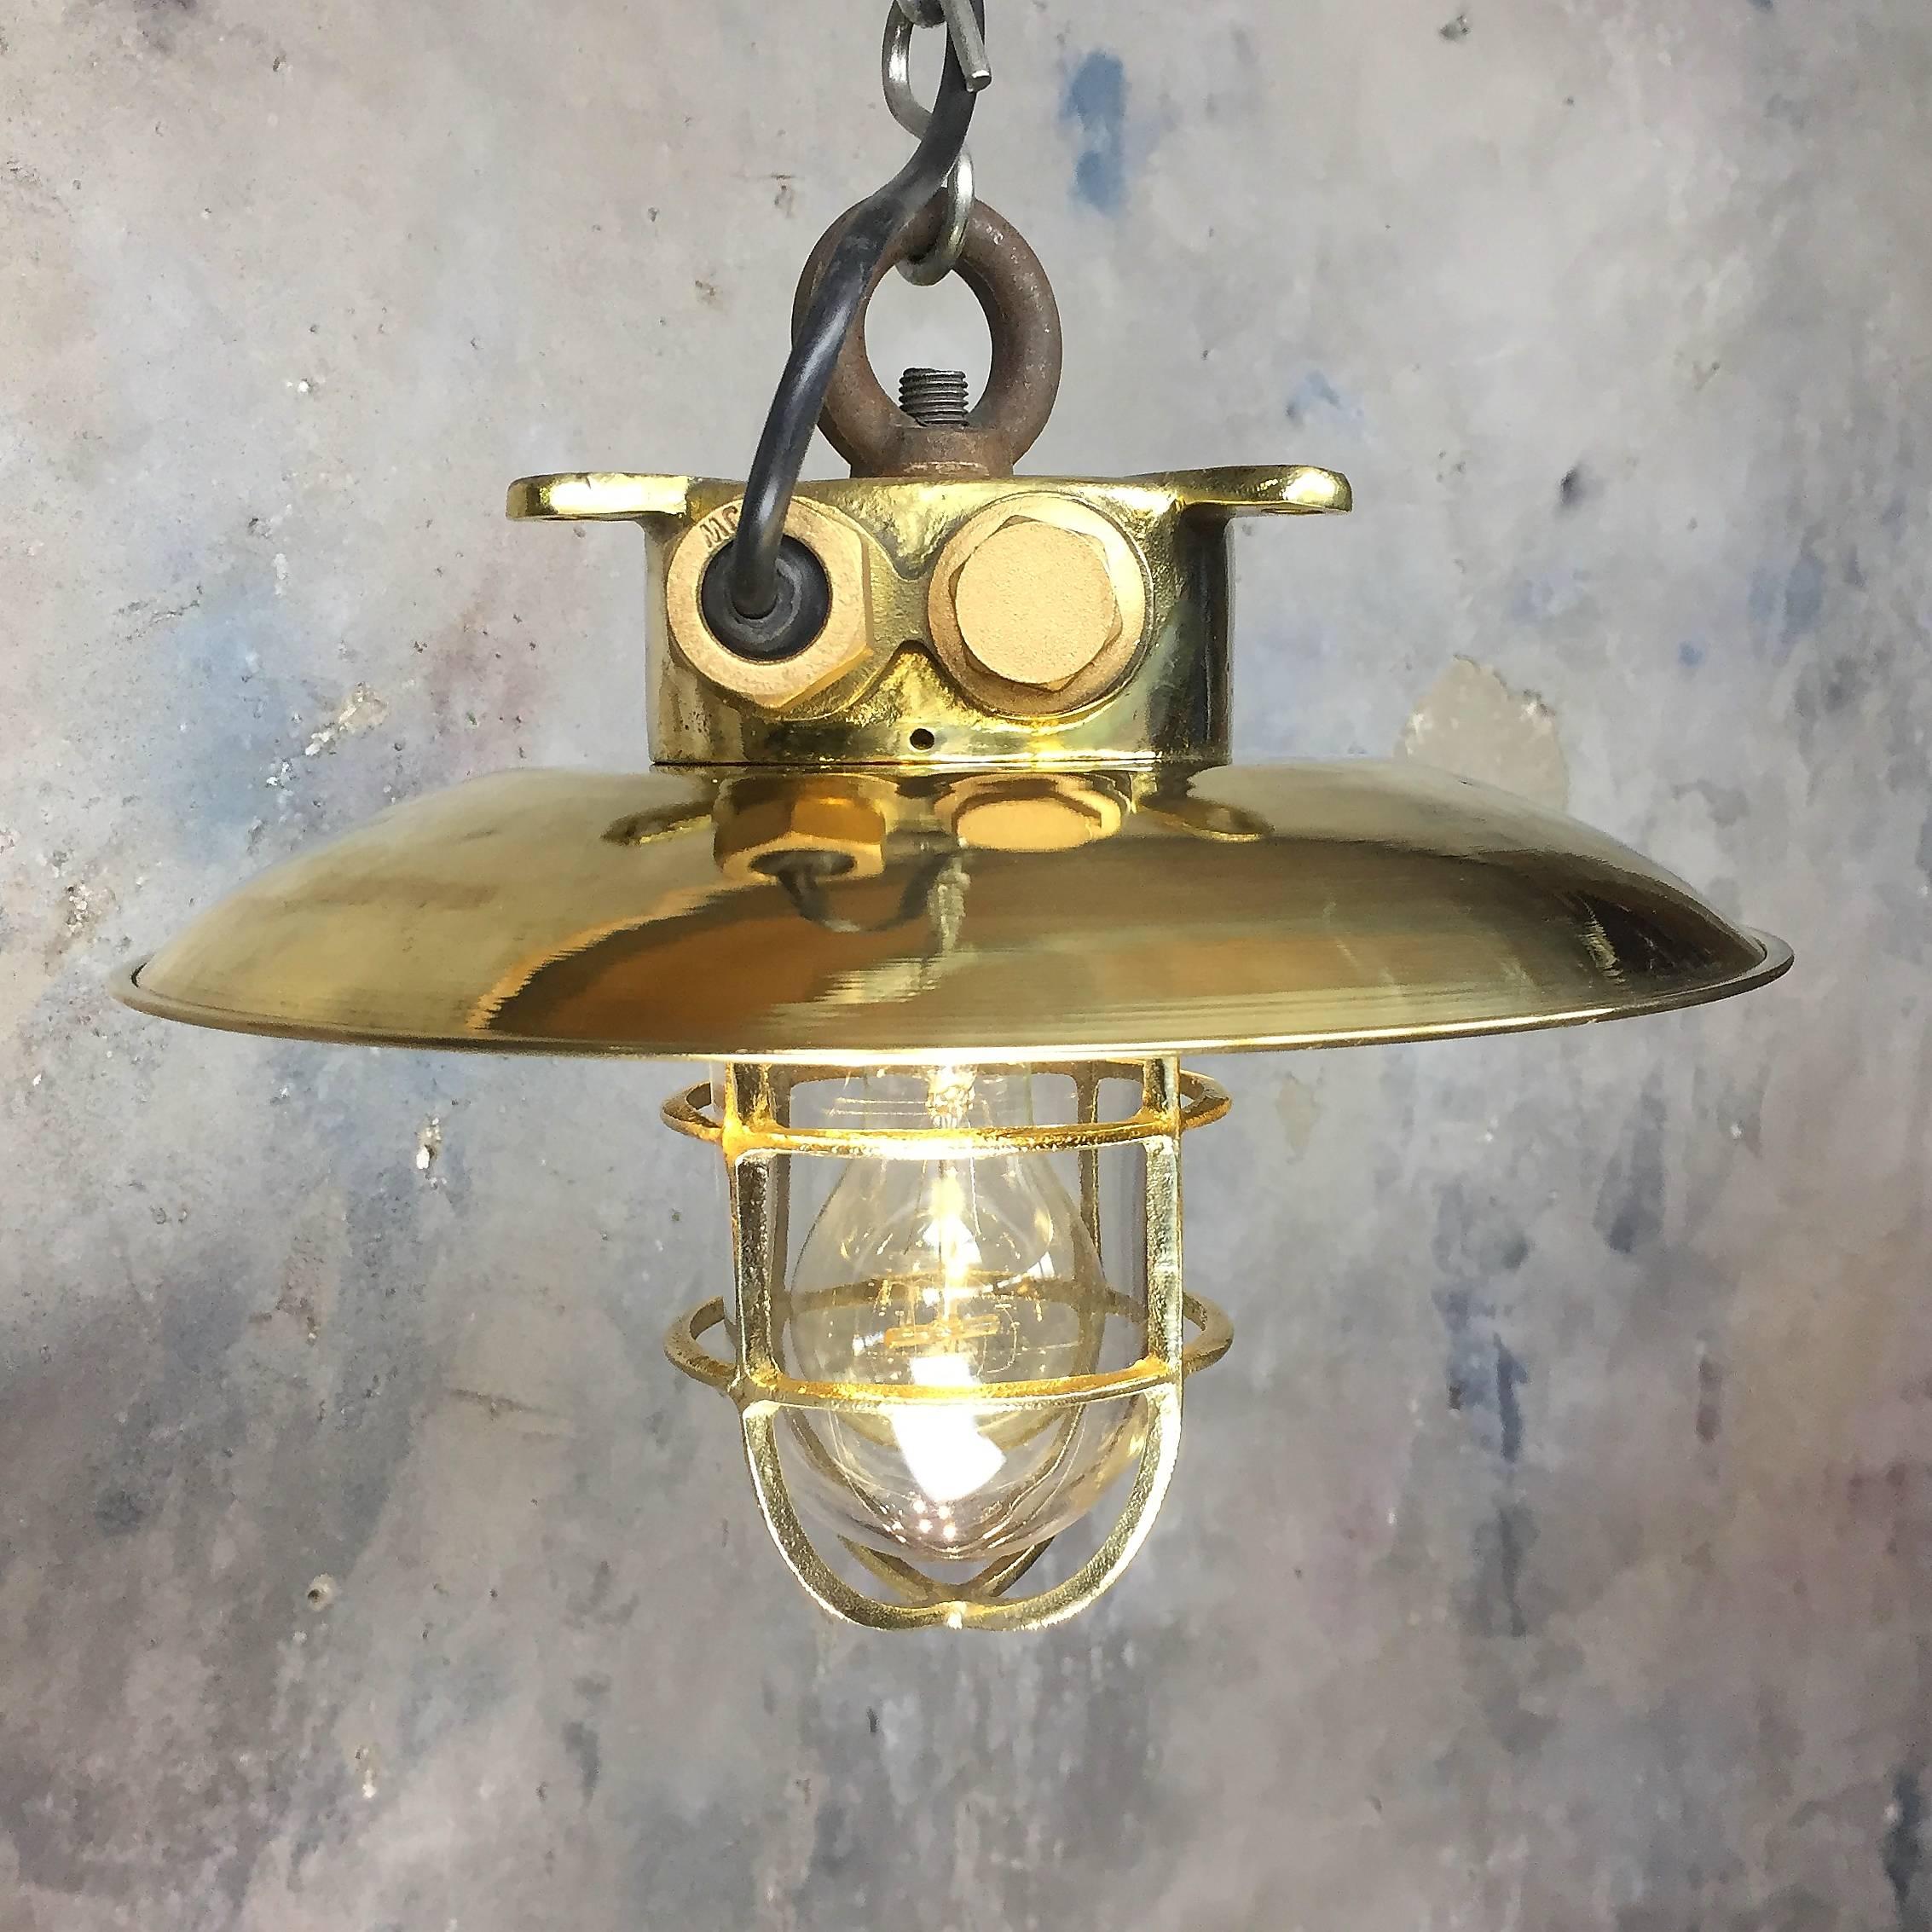 Cast Mid-Late 20th Century Brass Explosion Proof Pendant Brass Shade and Glass Dome For Sale